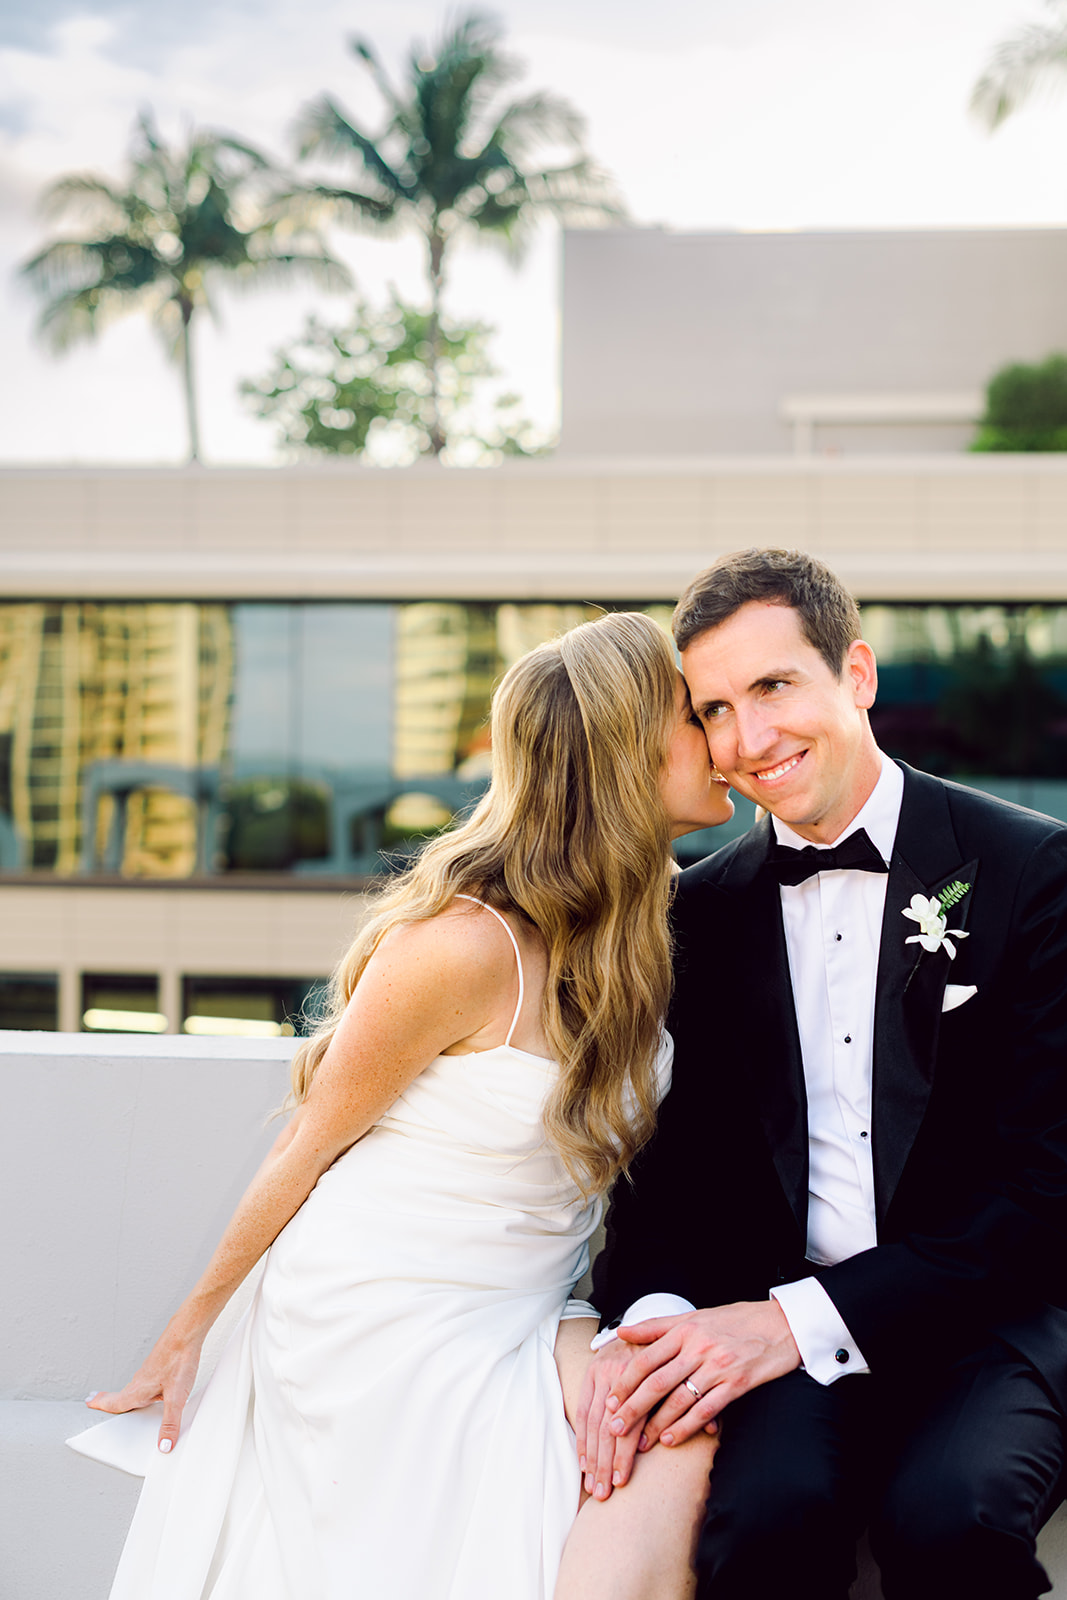 Couples golden hour portrait session bride whispers to groom at Mayfair House Hotel & Garden in Miami on wedding day.